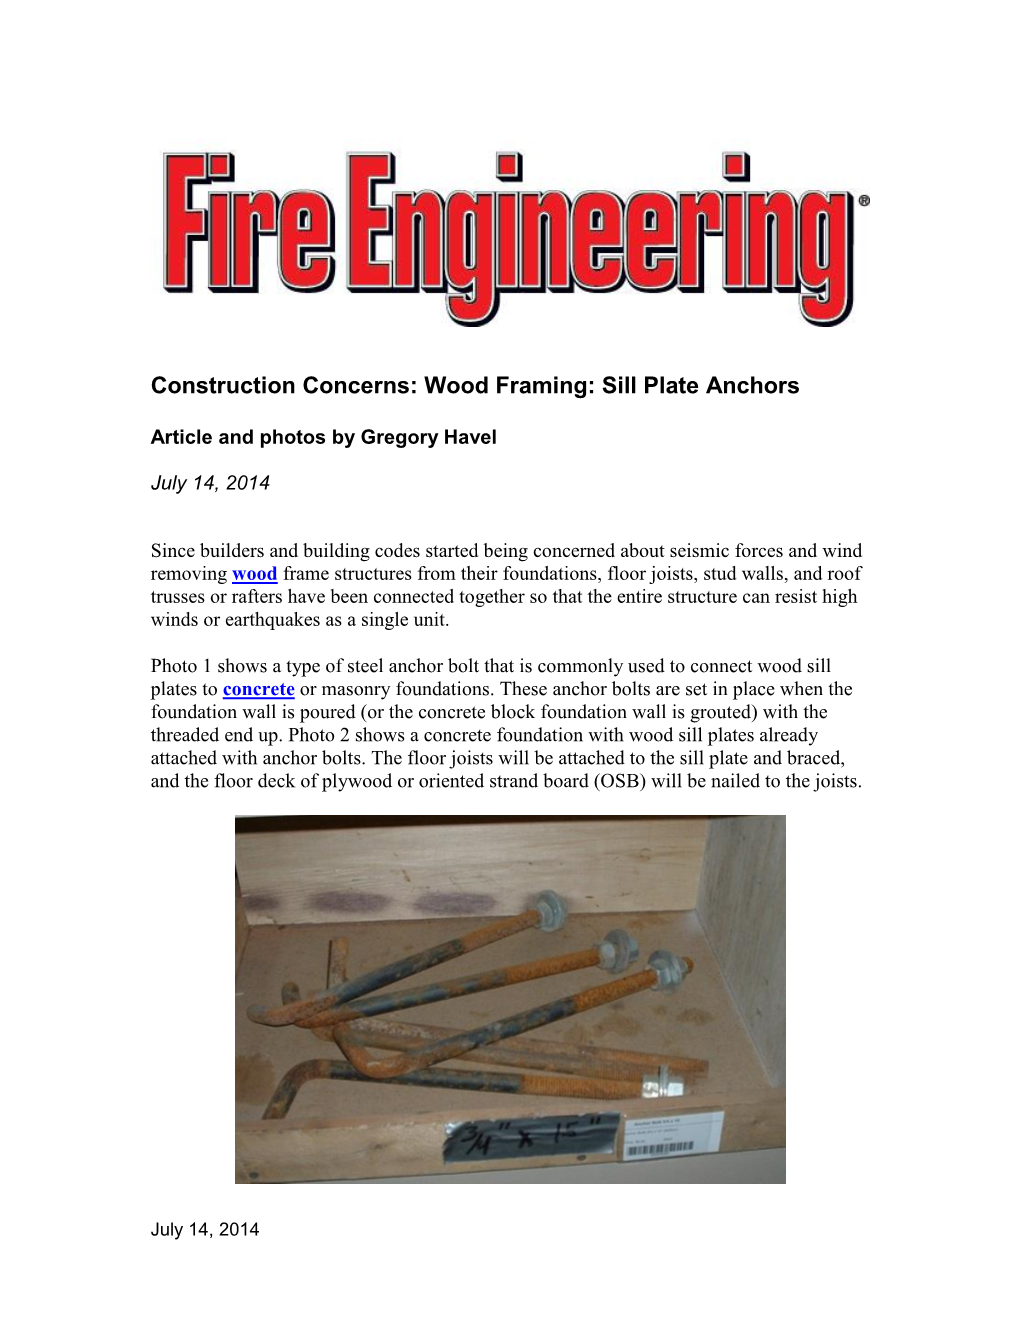 Construction Concerns: Wood Framing: Sill Plate Anchors